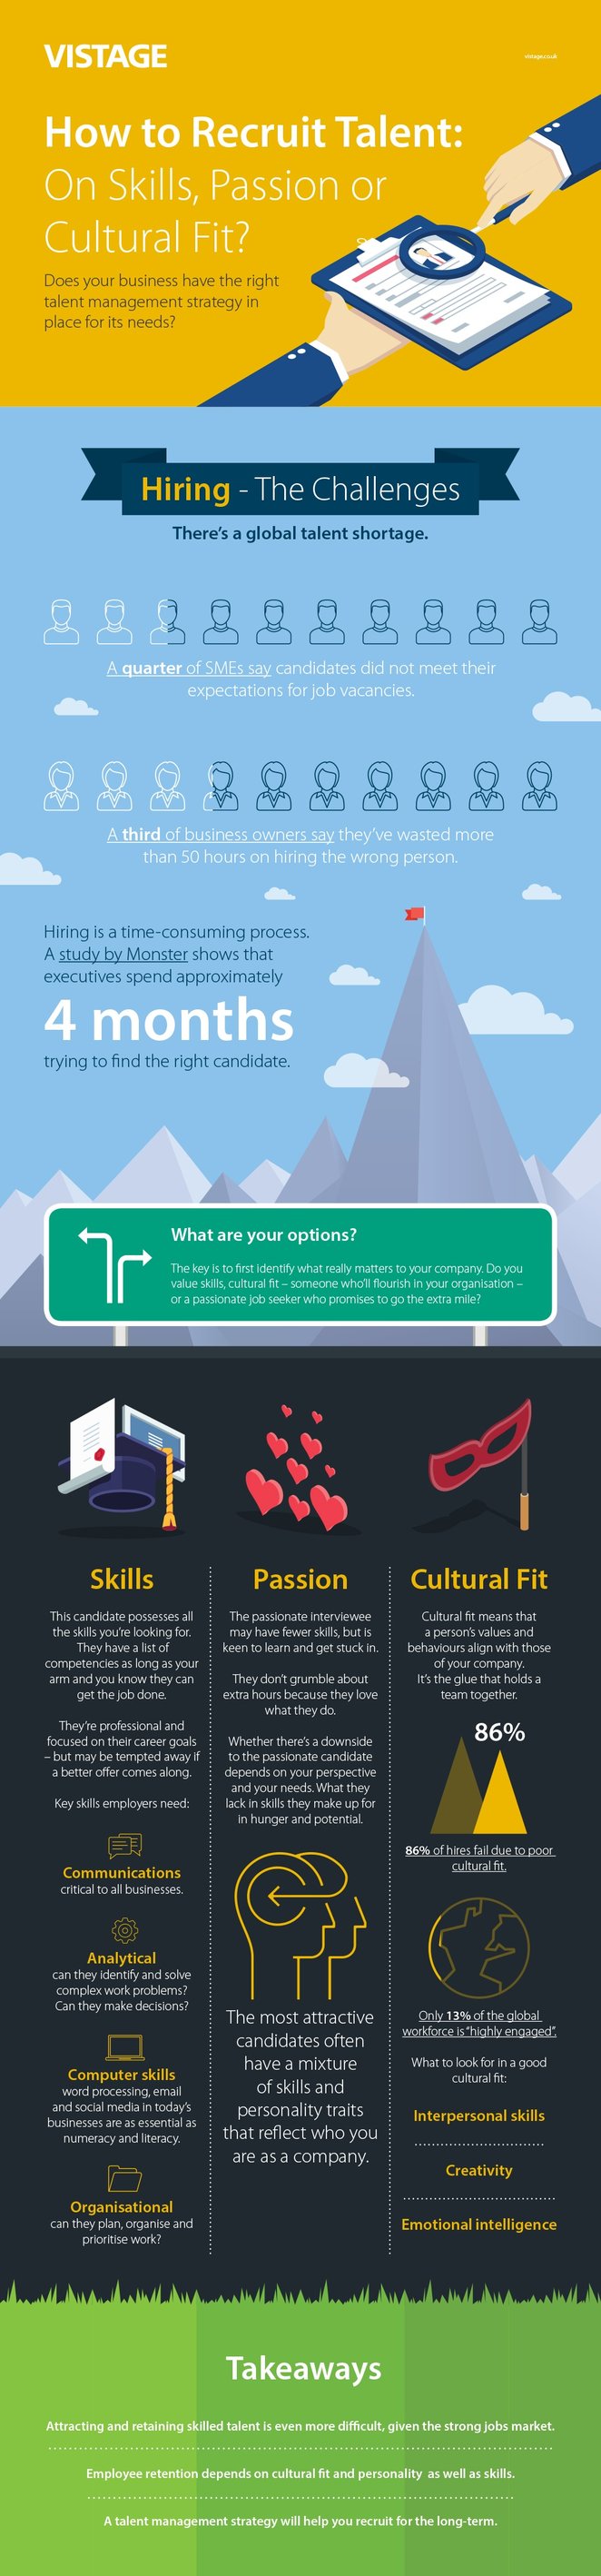 how-to-recruit-talent-on-skills-passion-or-cultural-v2.jpg